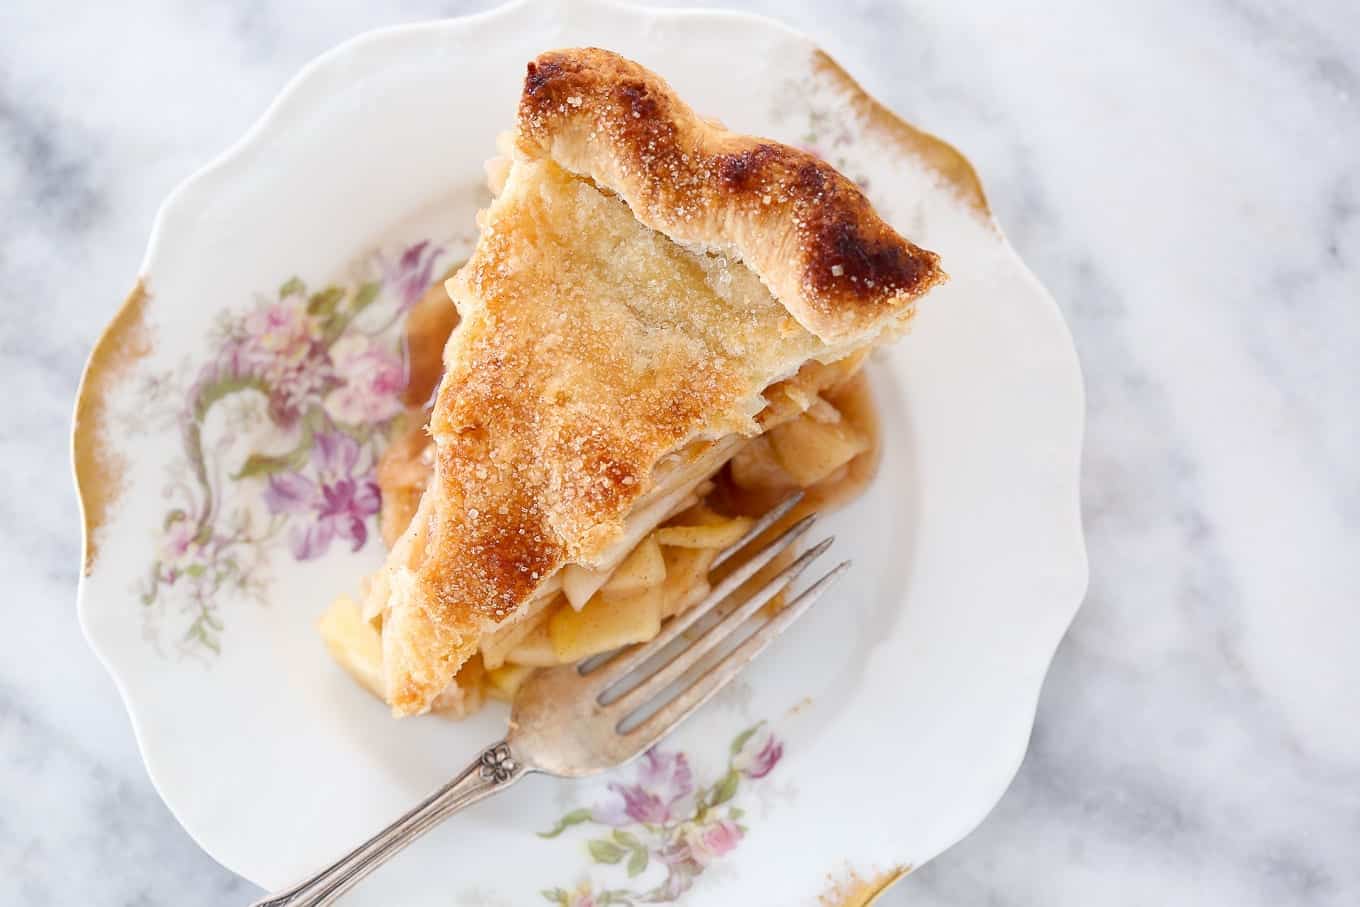 A slice of apple pie with a golden top crust.